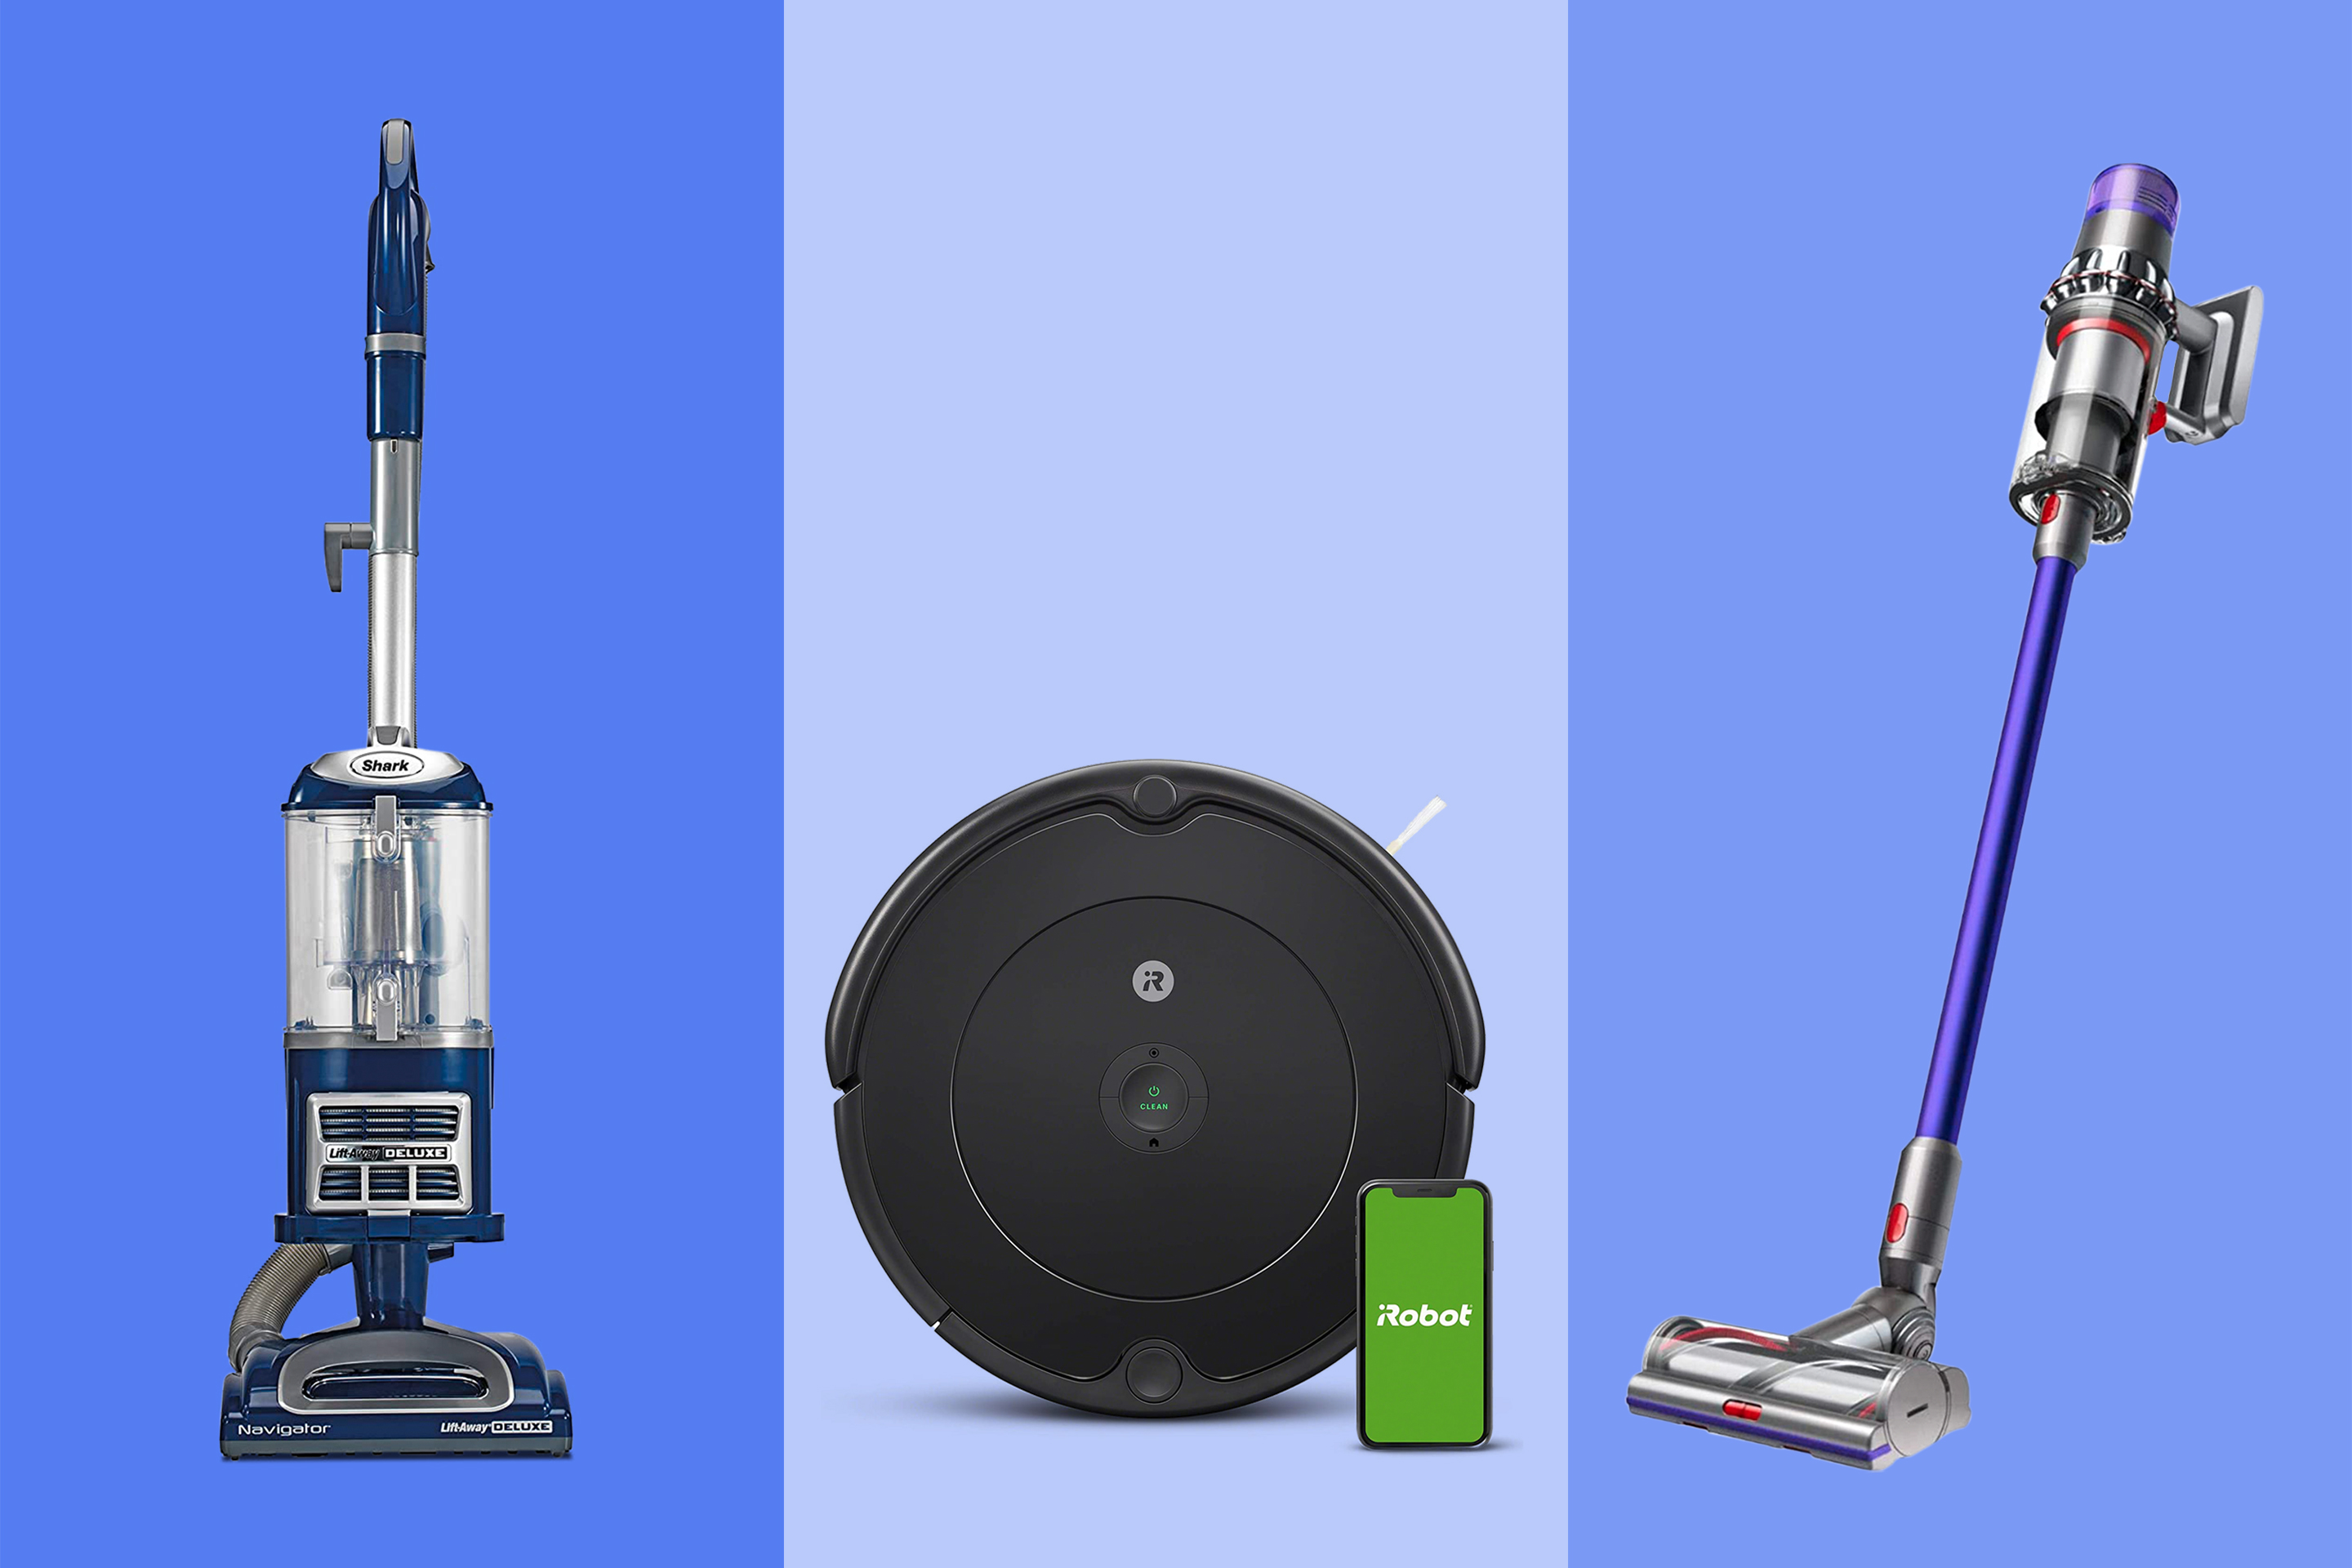 The Best Vacuum Deals for Black Friday